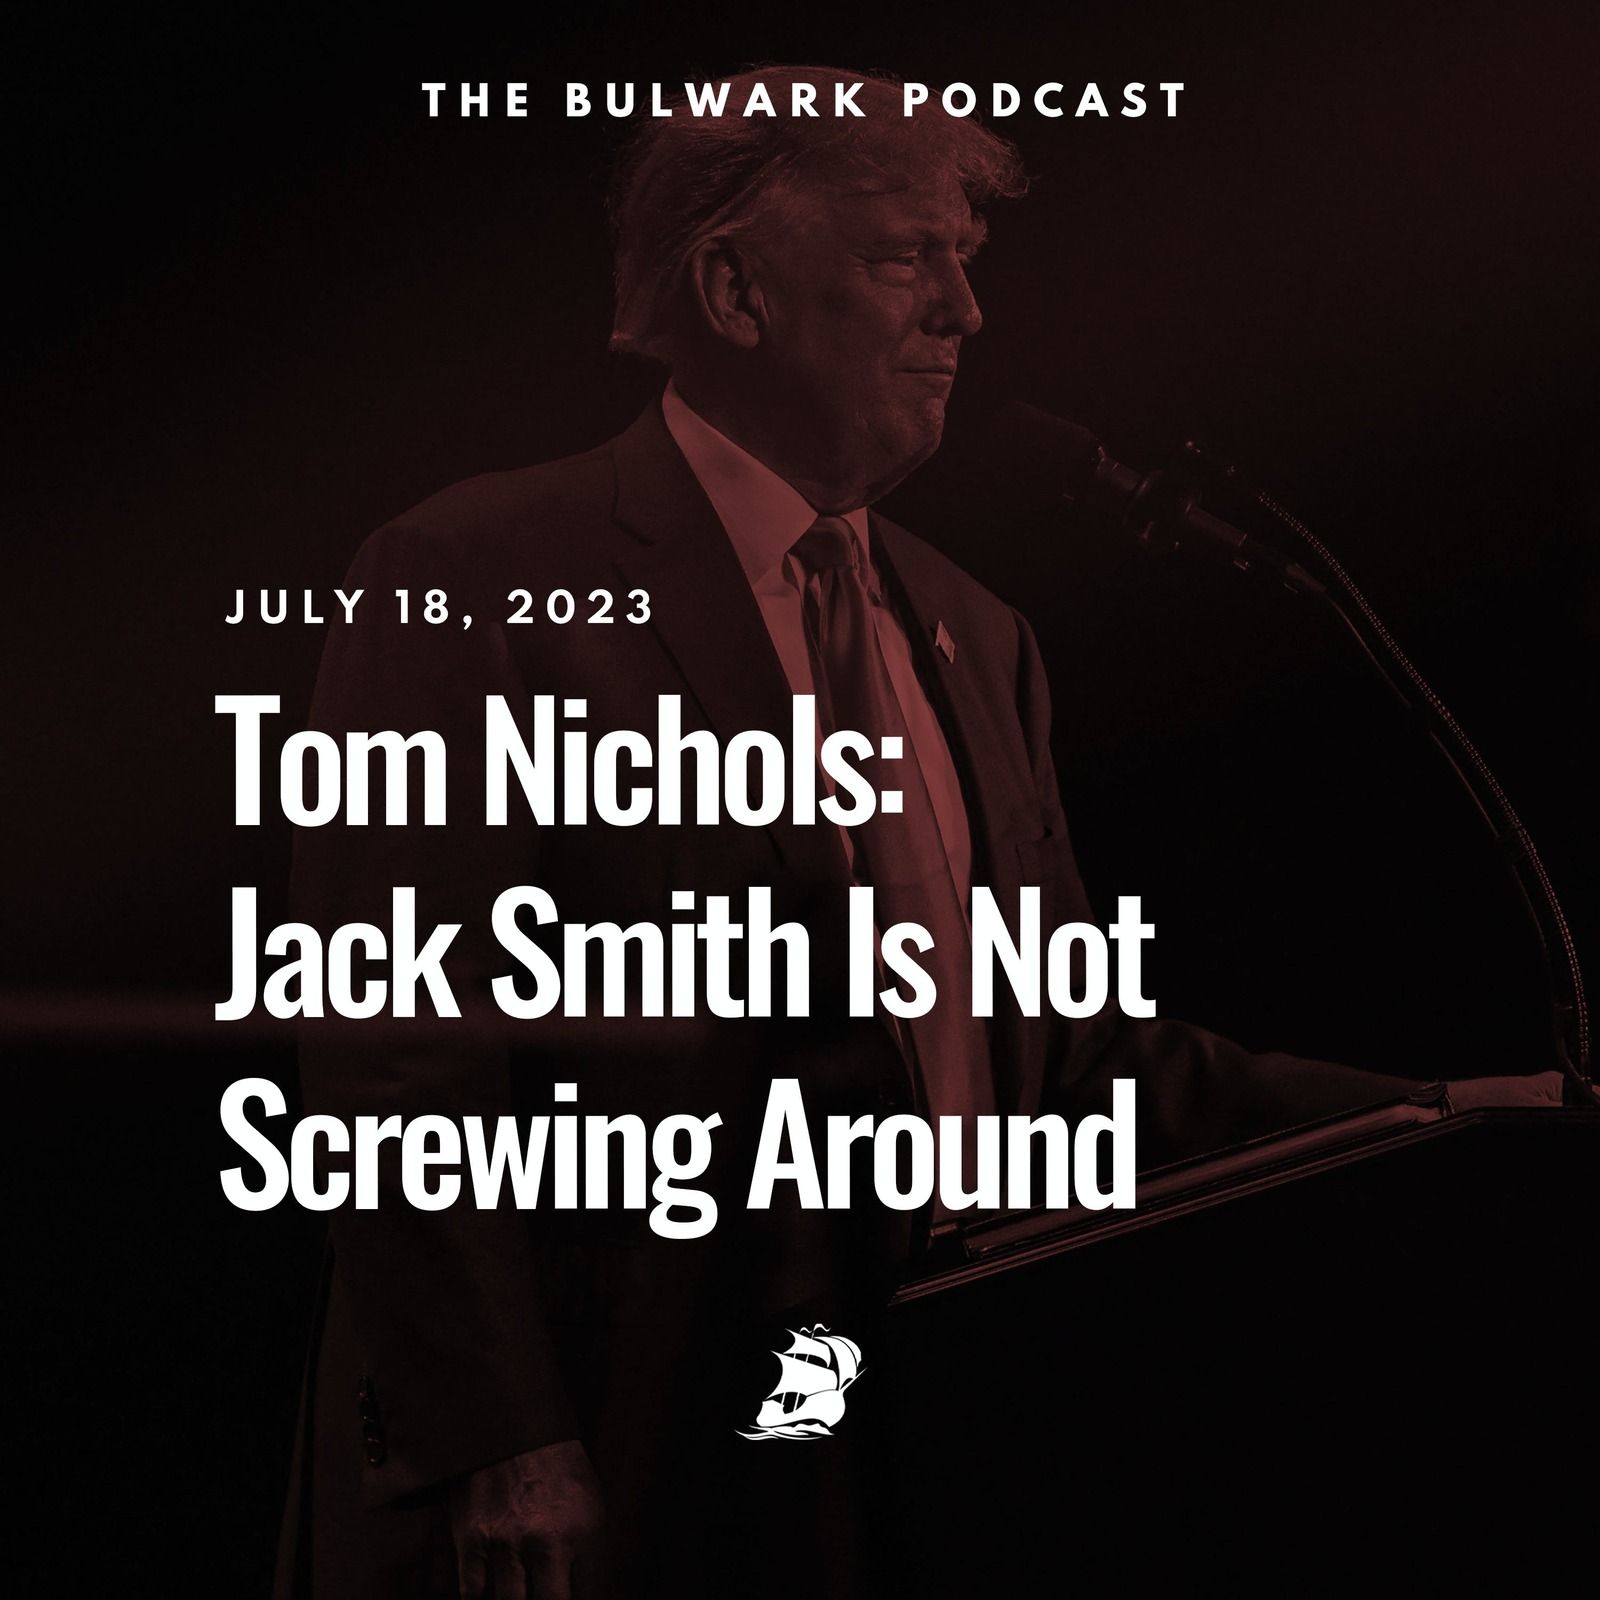 Tom Nichols: Jack Smith Is Not Screwing Around by The Bulwark Podcast